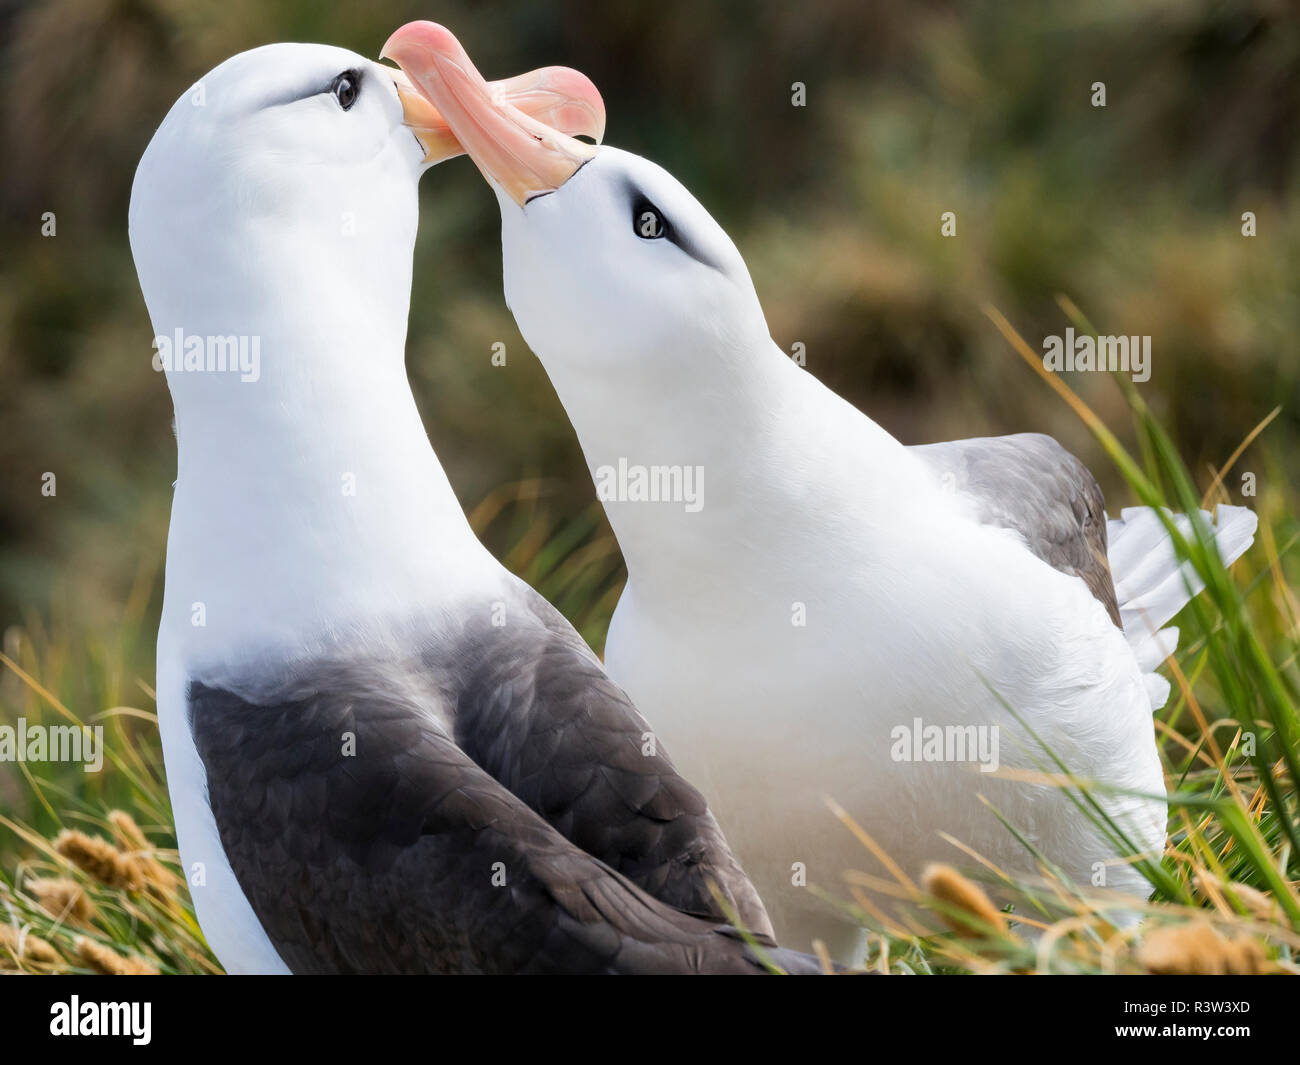 Black-browed albatross or black-browed mollymawk (Thalassarche melanophris), typical courtship and greeting behavior. South America, Falkland Islands Stock Photo